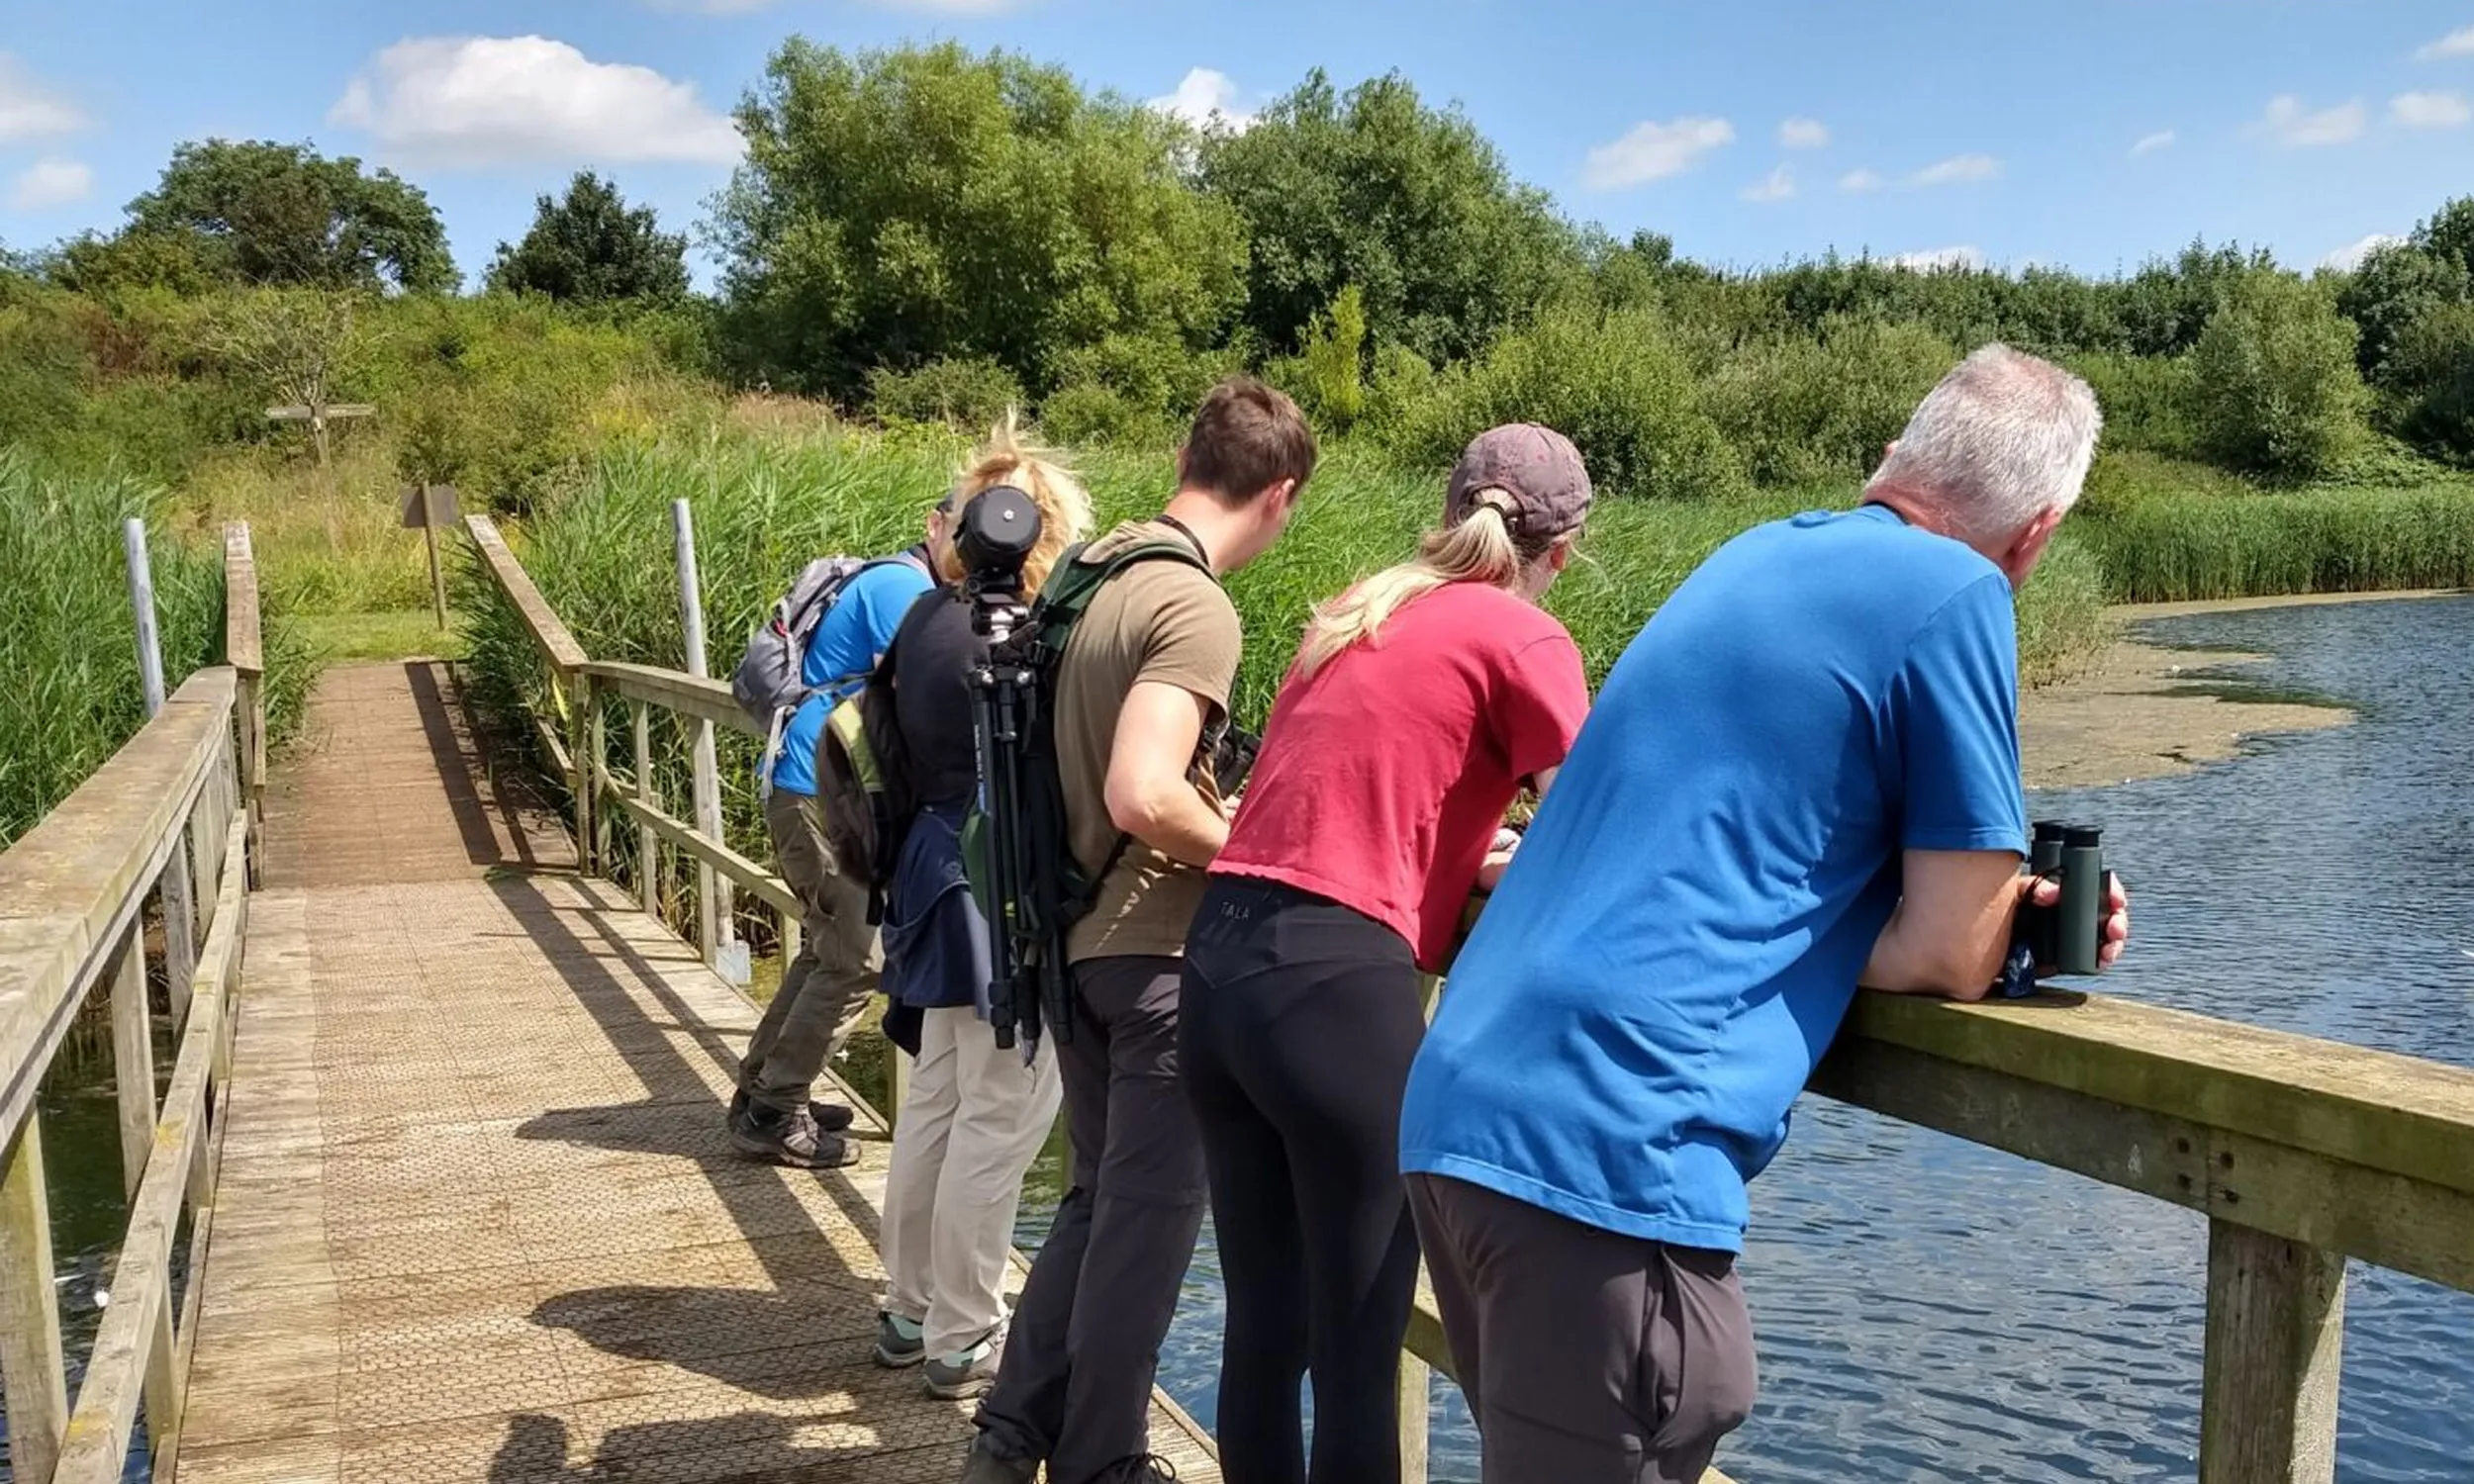 People leaning on the wooden handrail of a bridge that crosses a body of water at Langford Lowfields